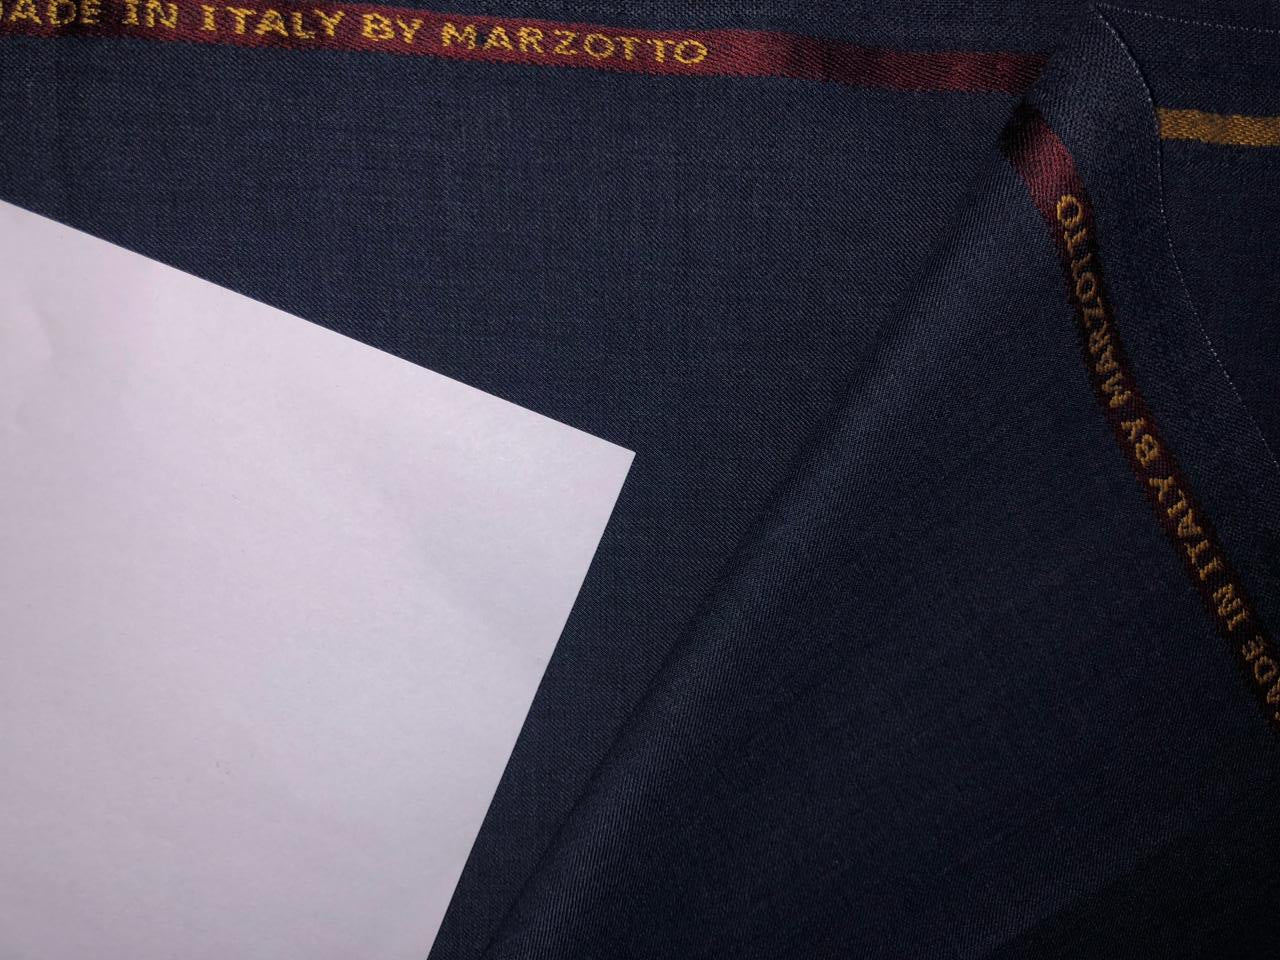 Suiting Superfine blended 70% poly 30% wool  58" wide available in 2 colors silver grey and grey  [15645/46]